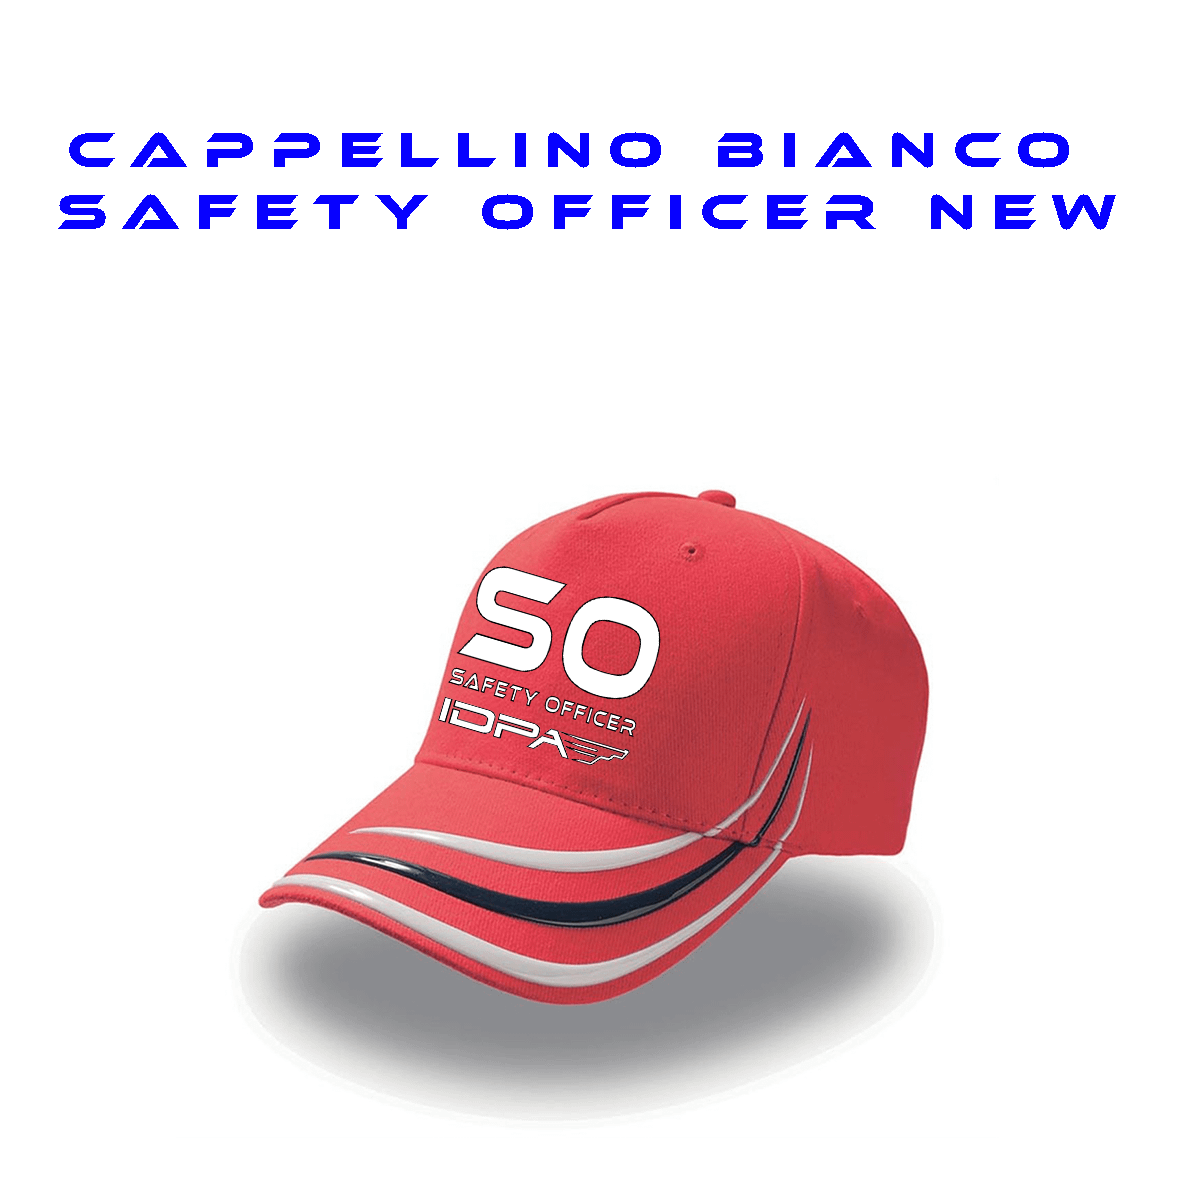 Cappellino Safety Officer New